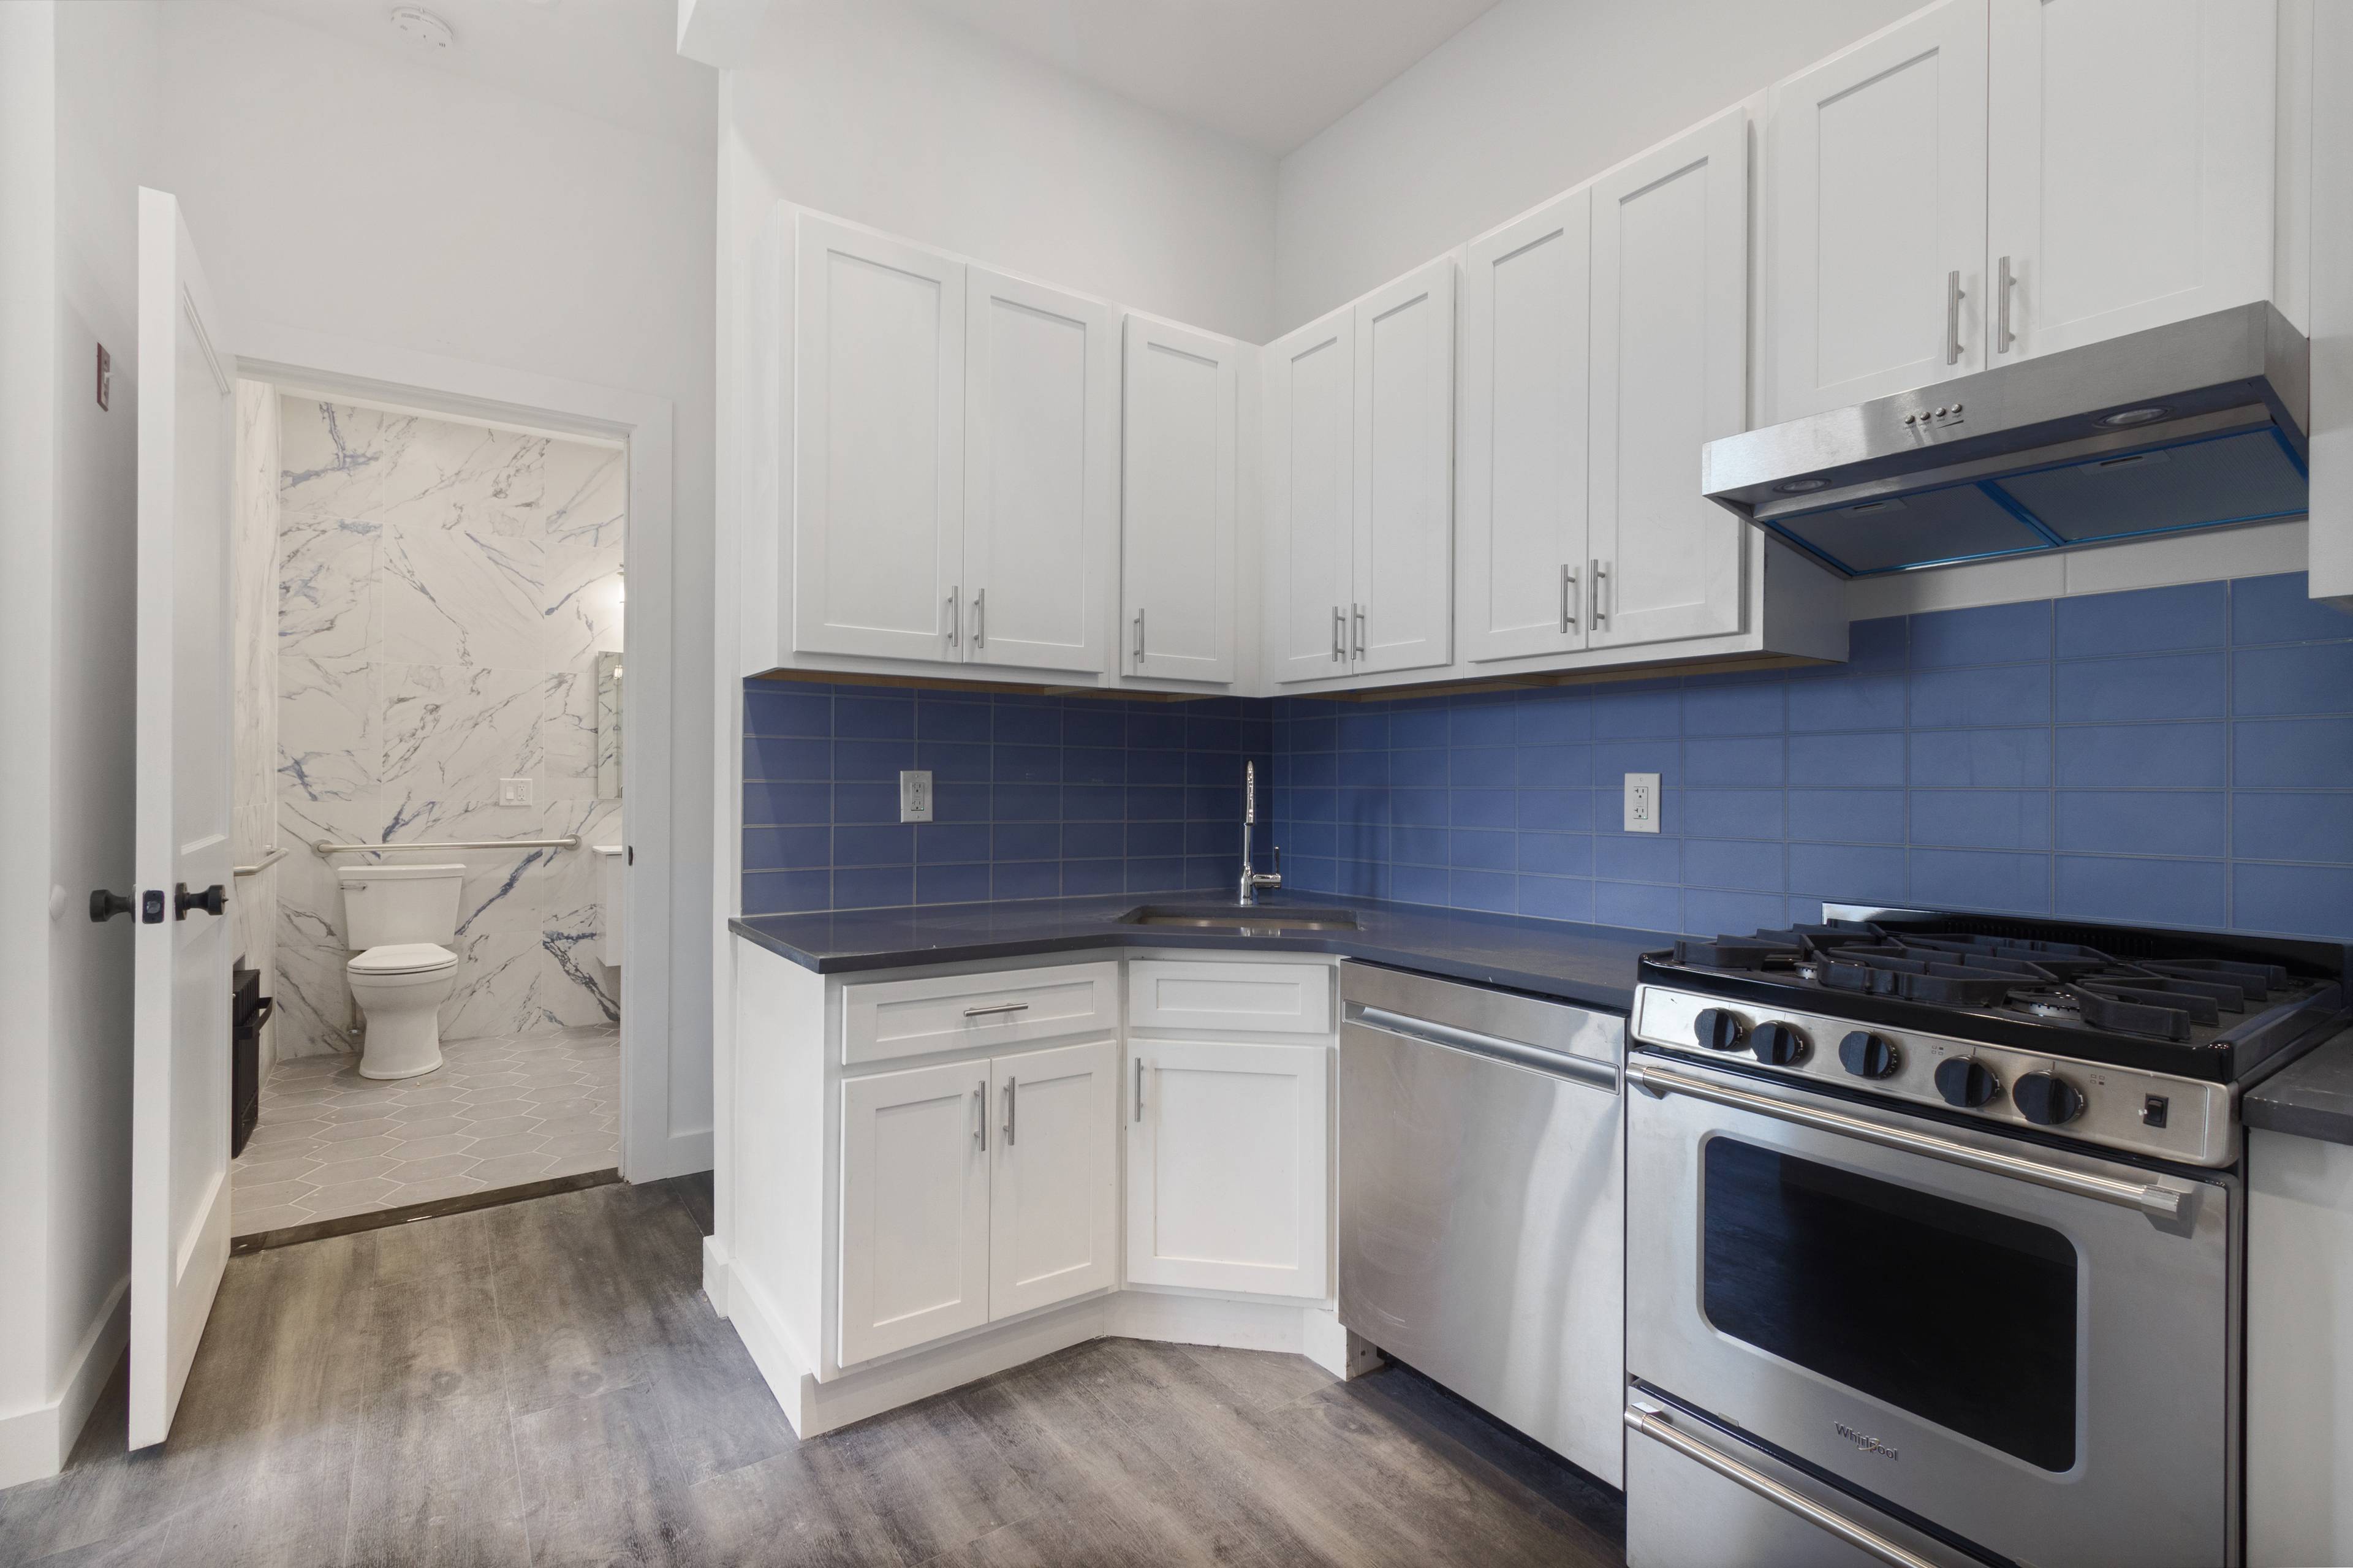 NEW DEVELOPMENT 2 BED/1 BATH ON LANDMARK BLOCK IN SUNSET PARK, BALCONY , W/D AND DISHWASHER IN UNIT